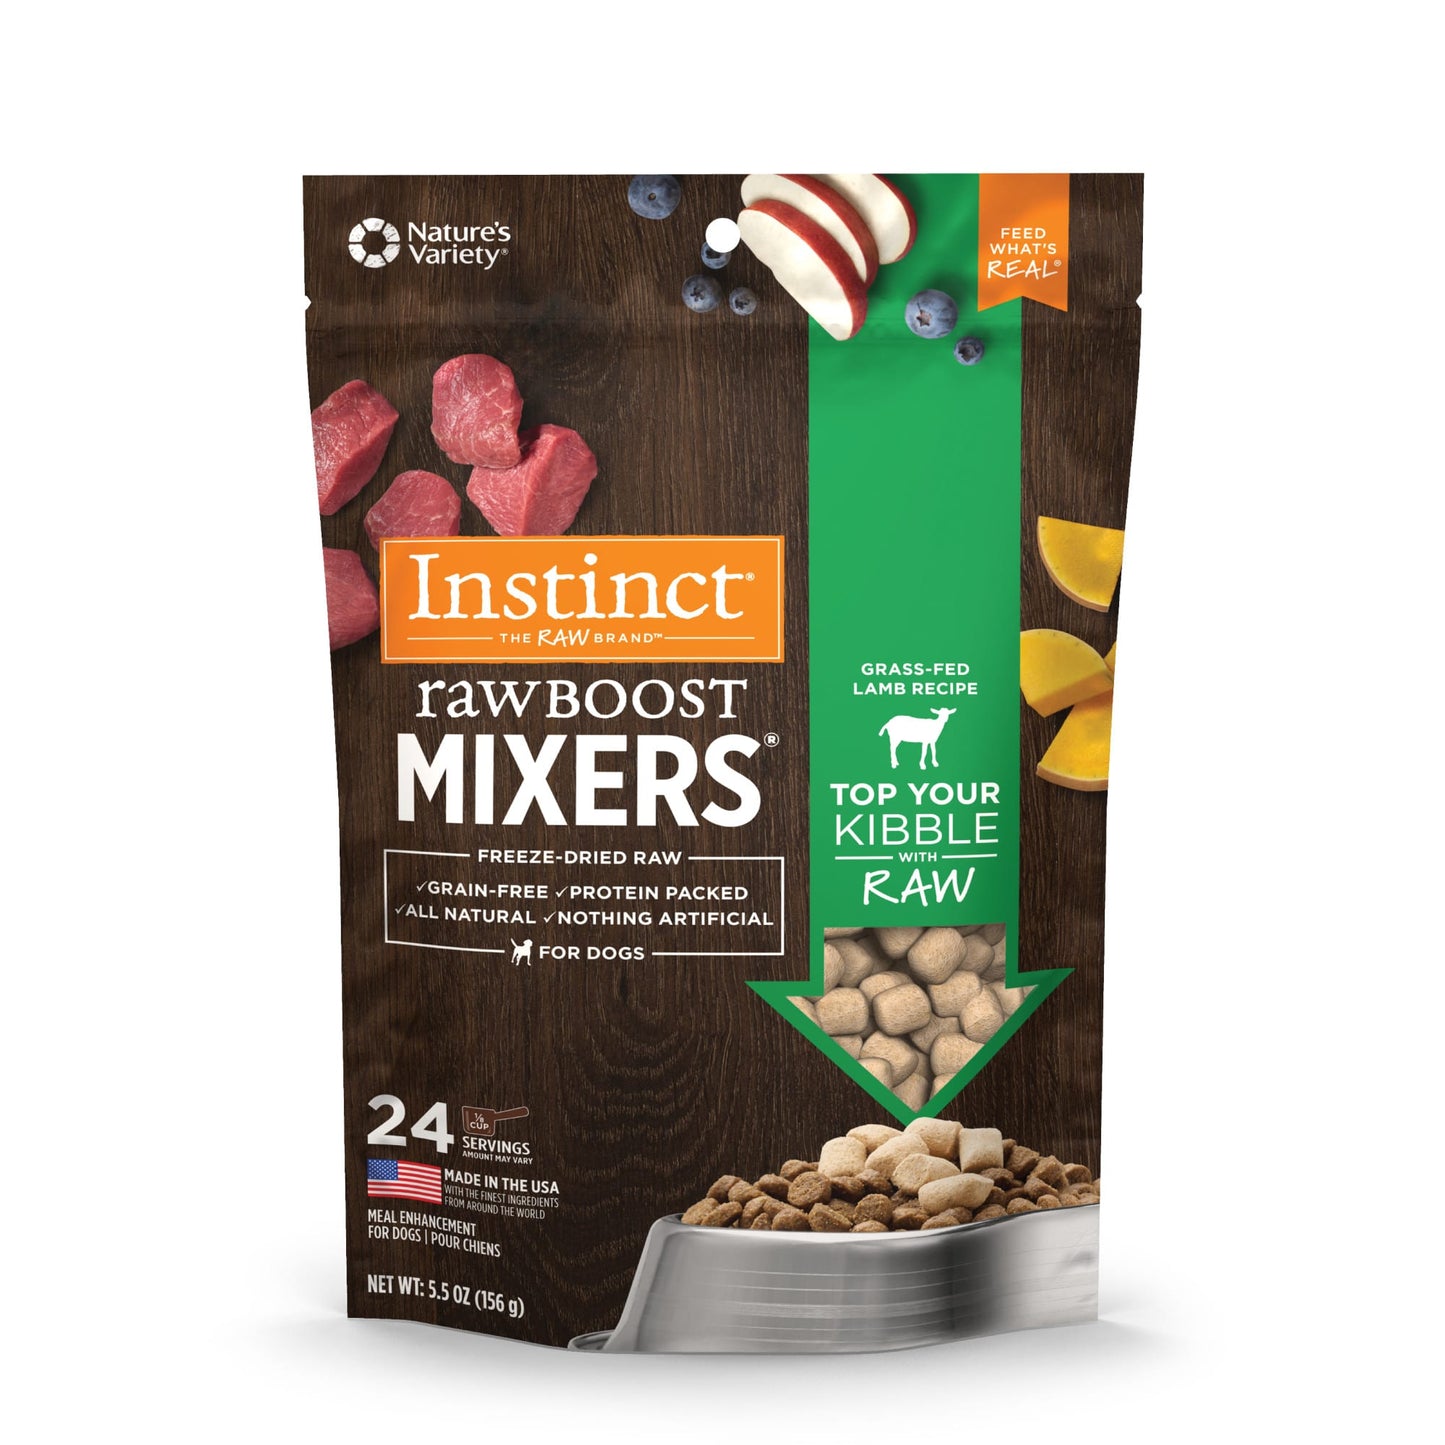 Instinct Freeze Dried Raw Boost Mixers Grain Free Grass Fed Lamb Recipe All Natural Dog Food Topper by Nature s Variety  5.5 oz. Bag